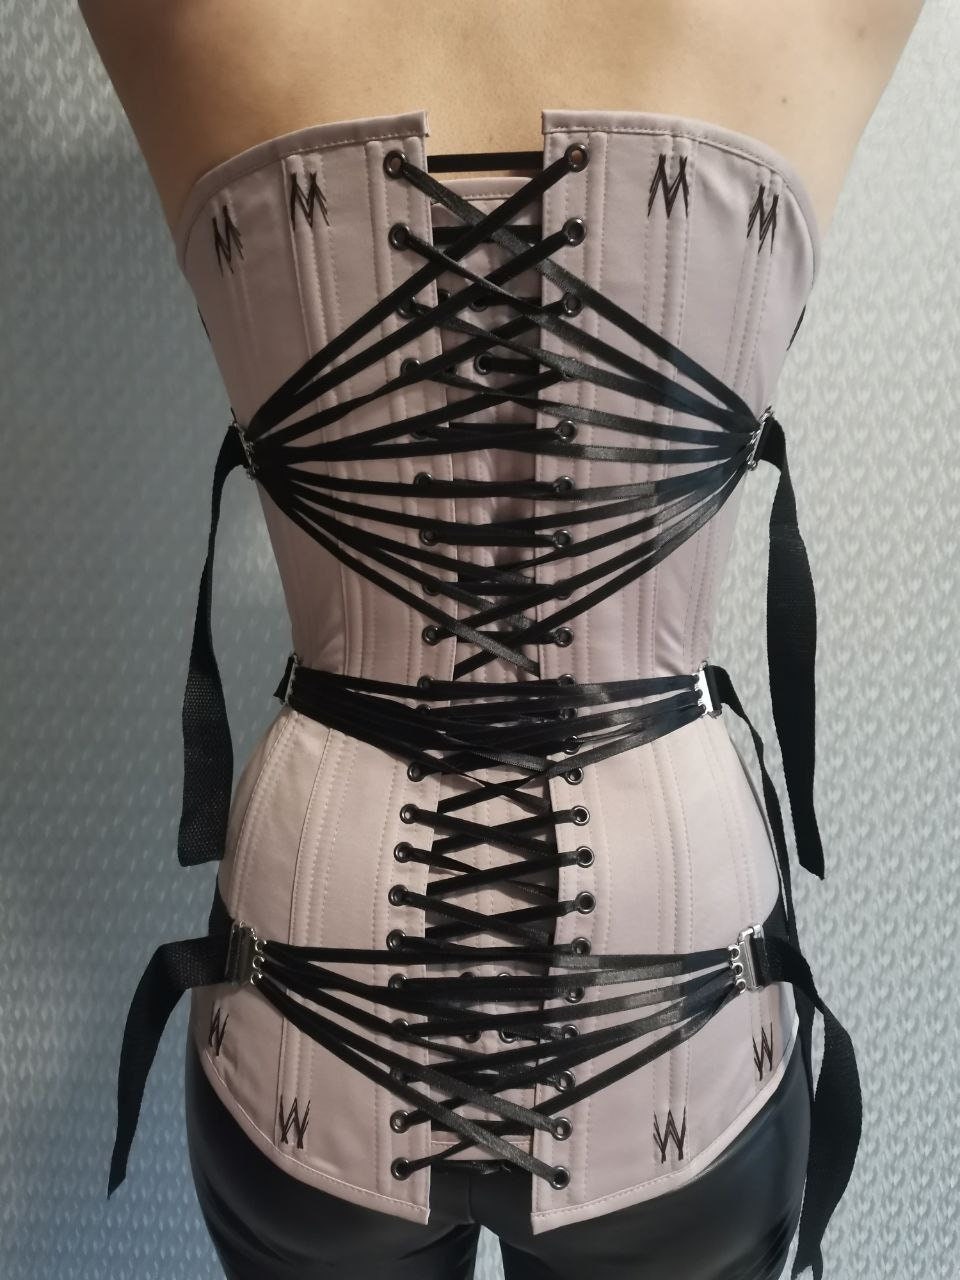 Pin on Waist Training and Tightlacing